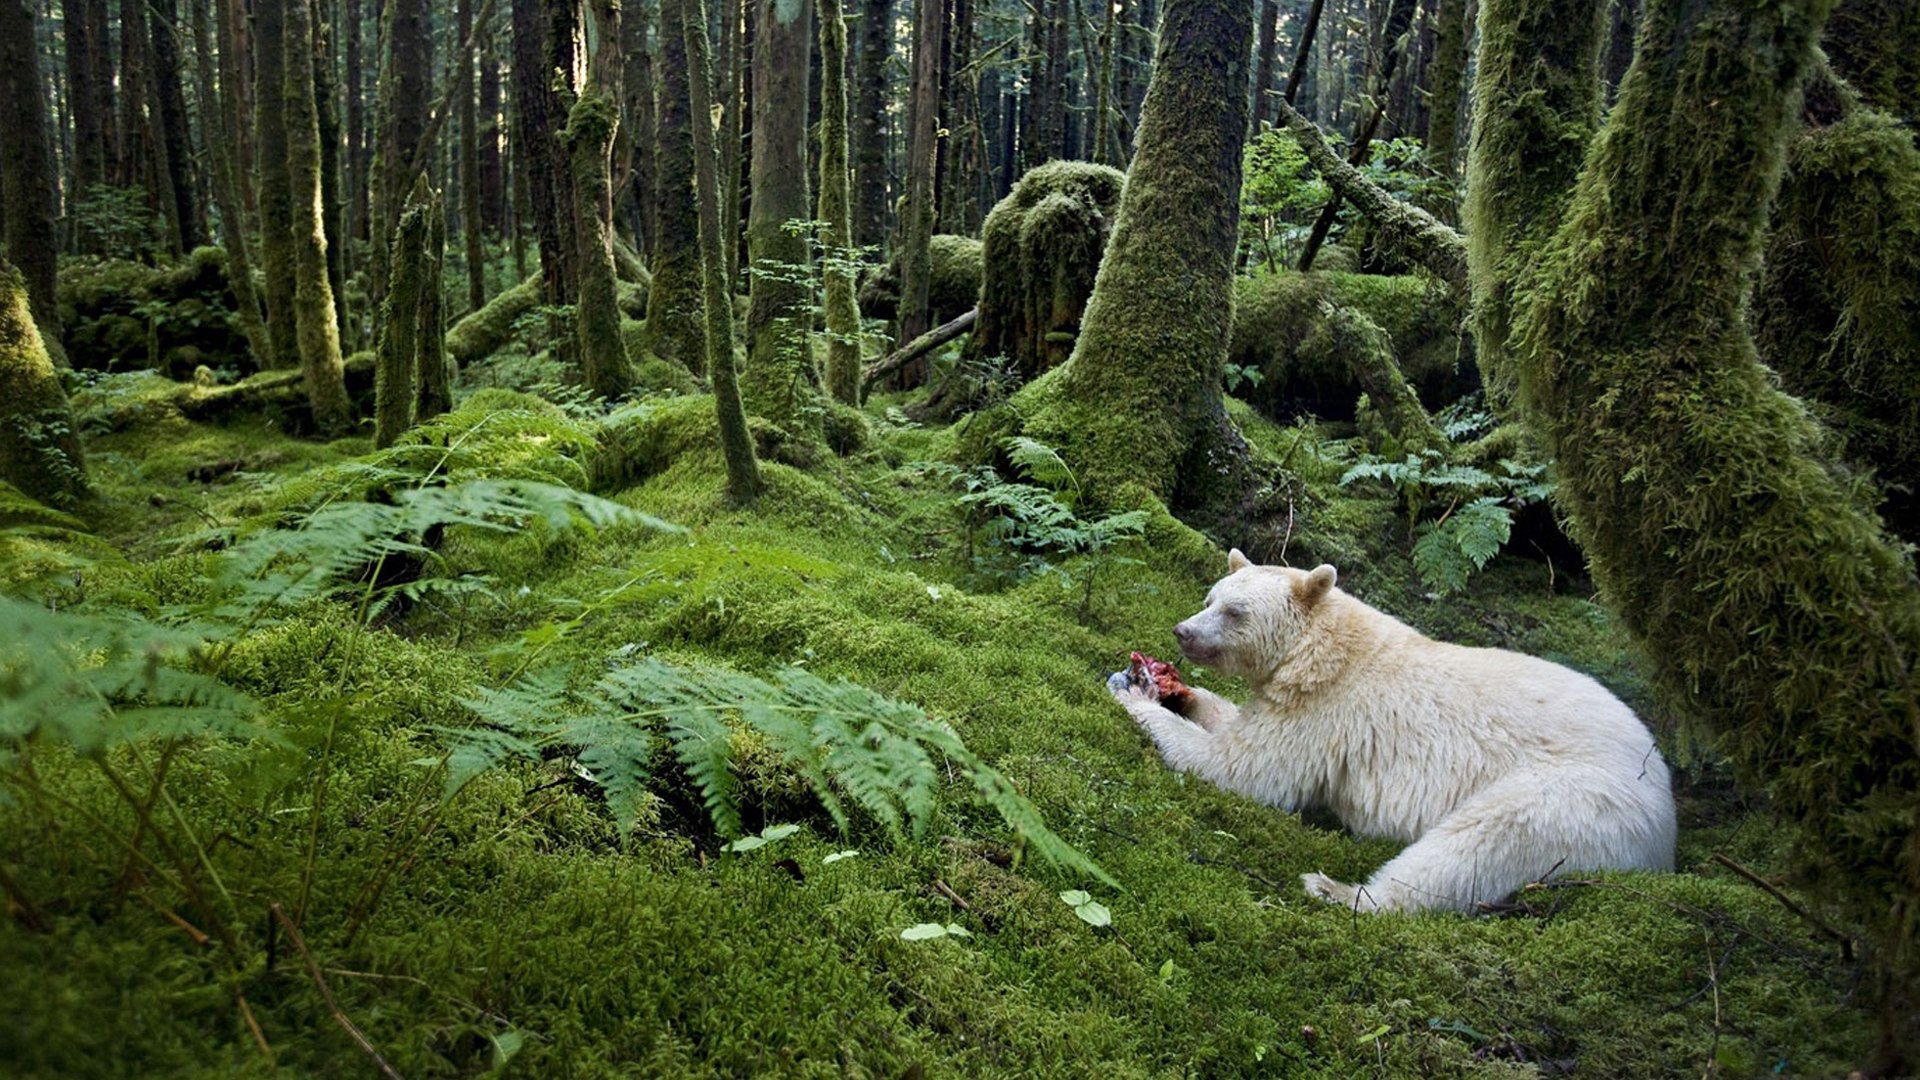 Download wallpaper 1920x1080 forest, bear, meal, albino HD background